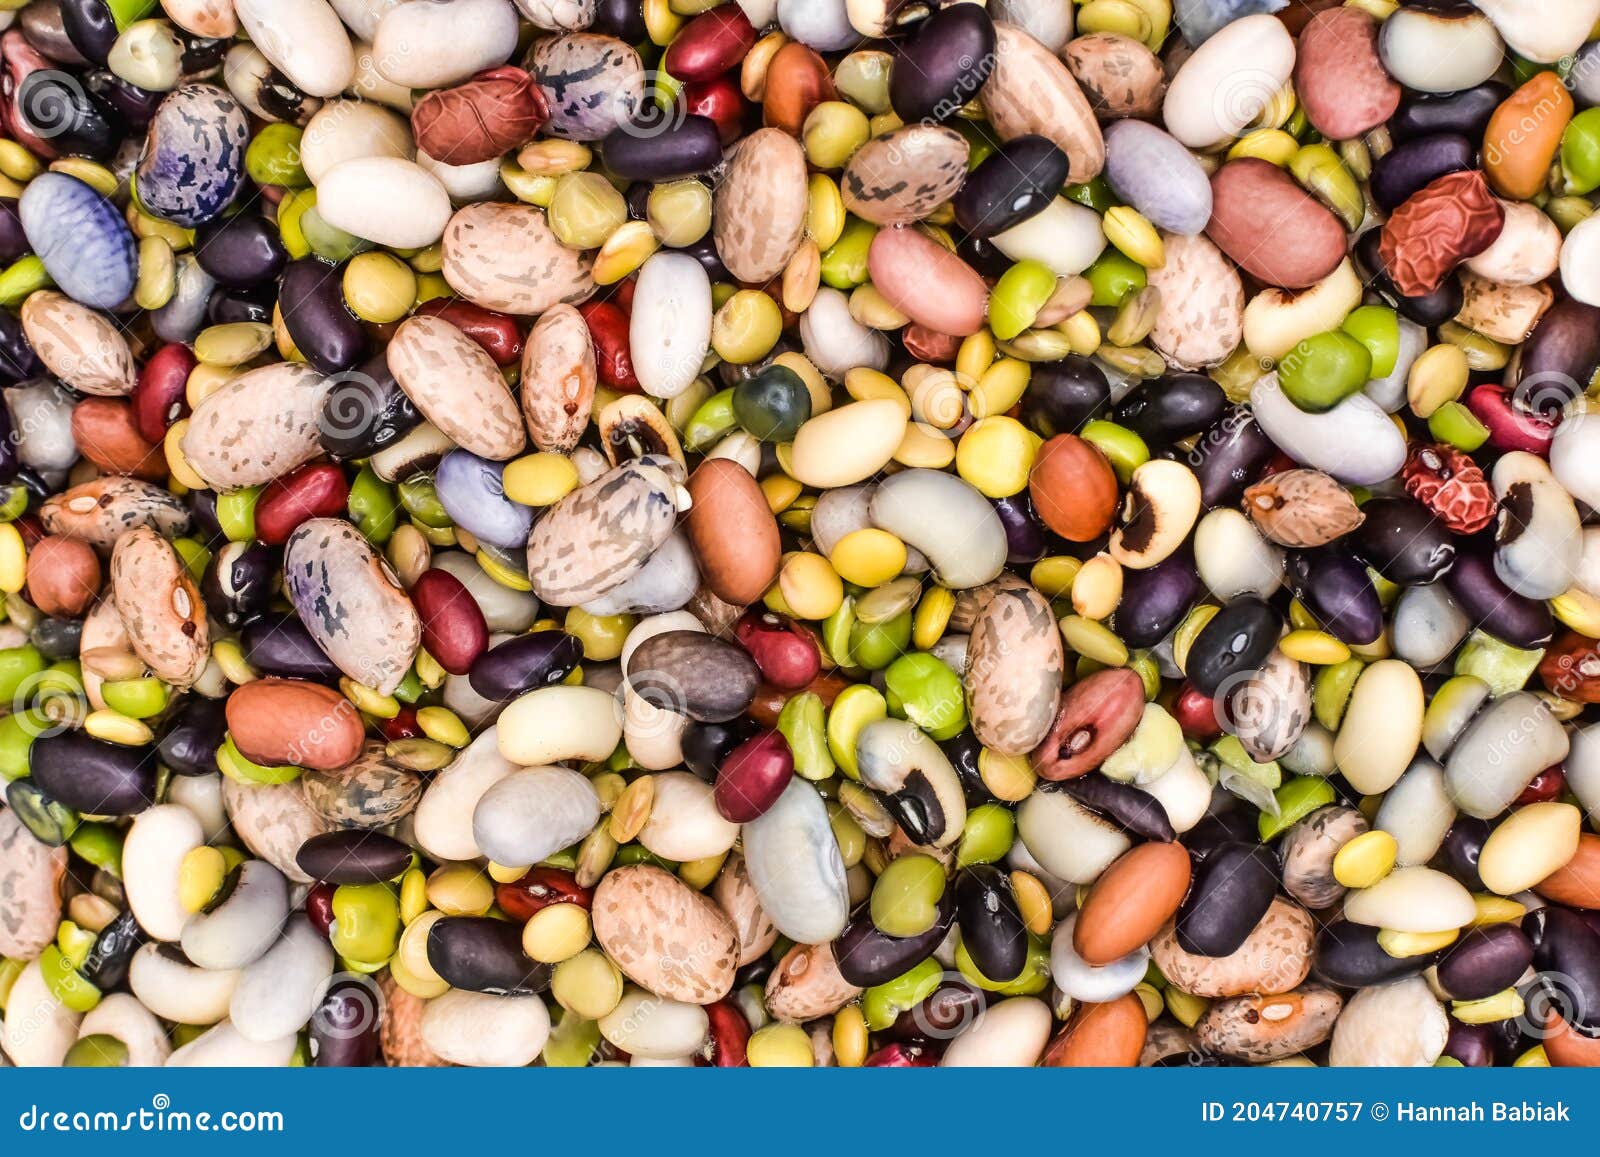 various varieties of beans and legumes, background